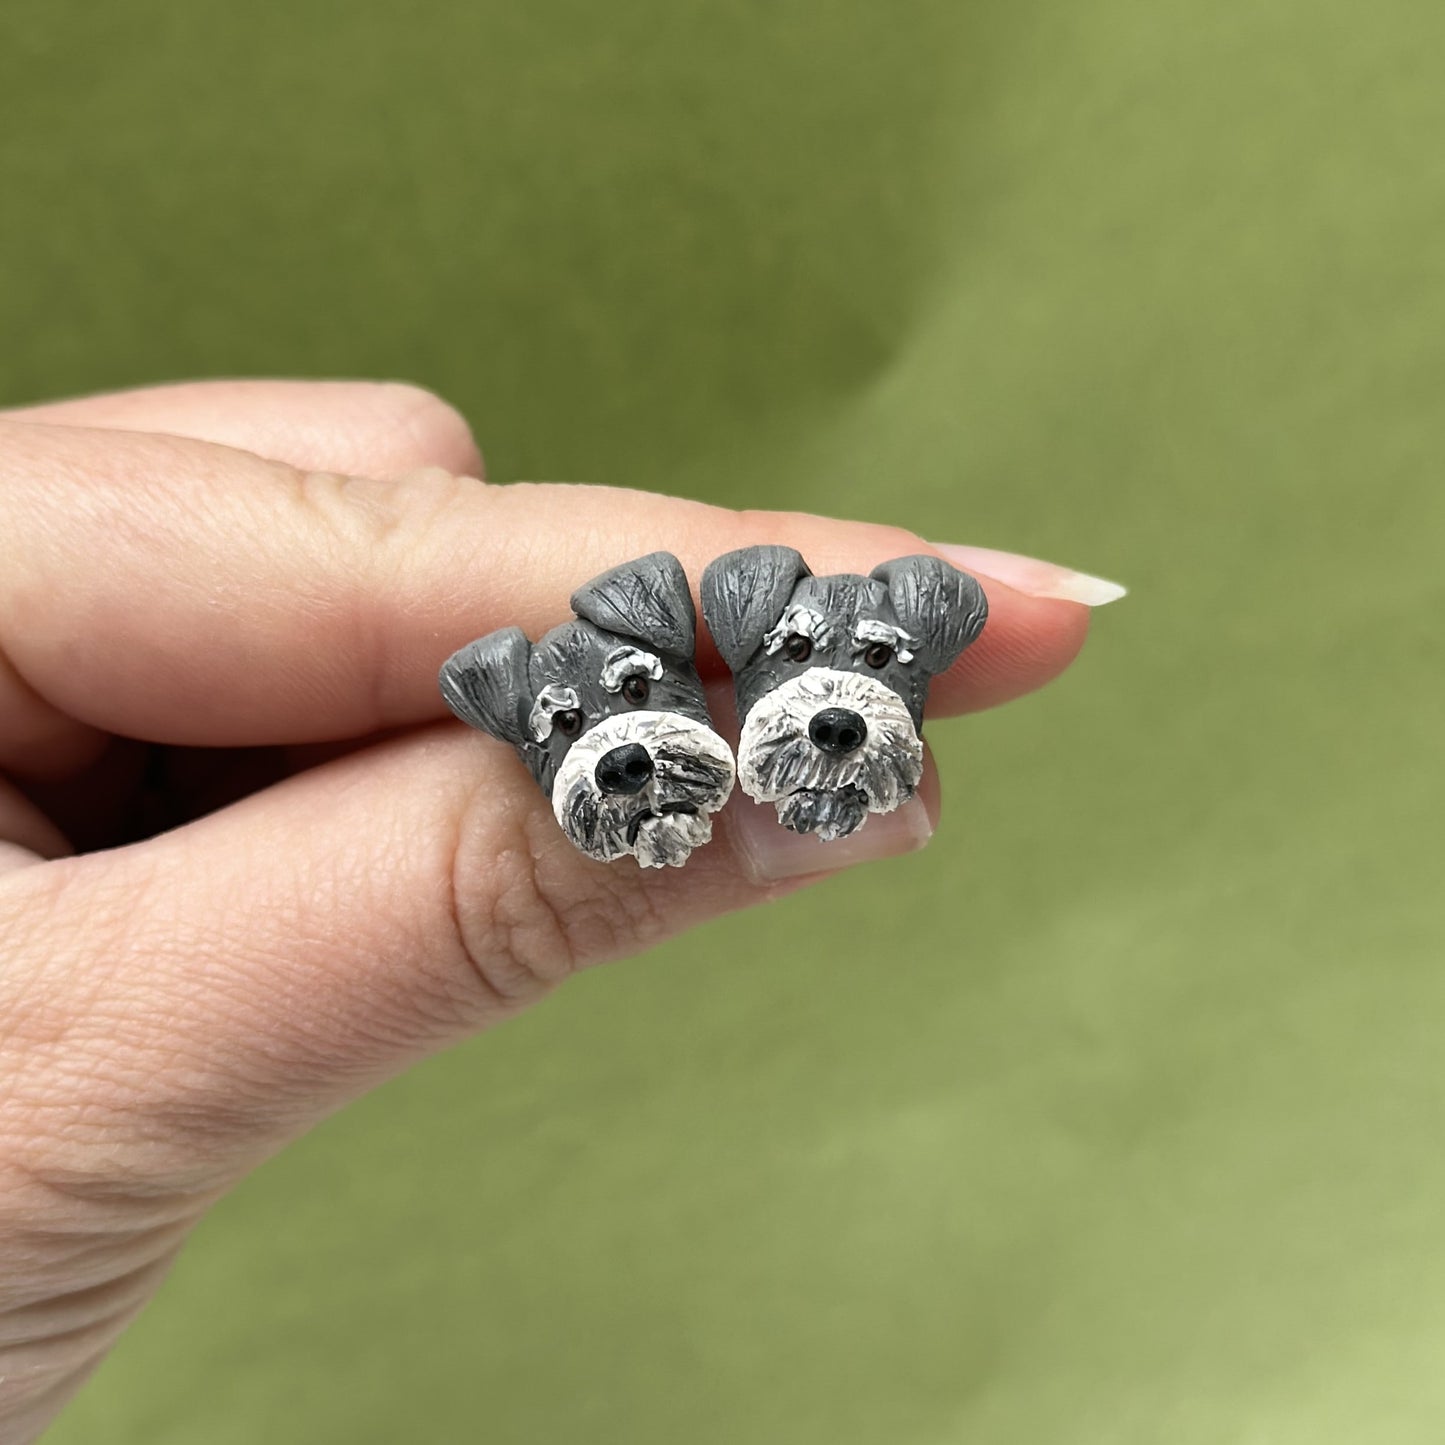 Handmade schnauzer stud earrings by Pawfect Love, positioned in front of green background